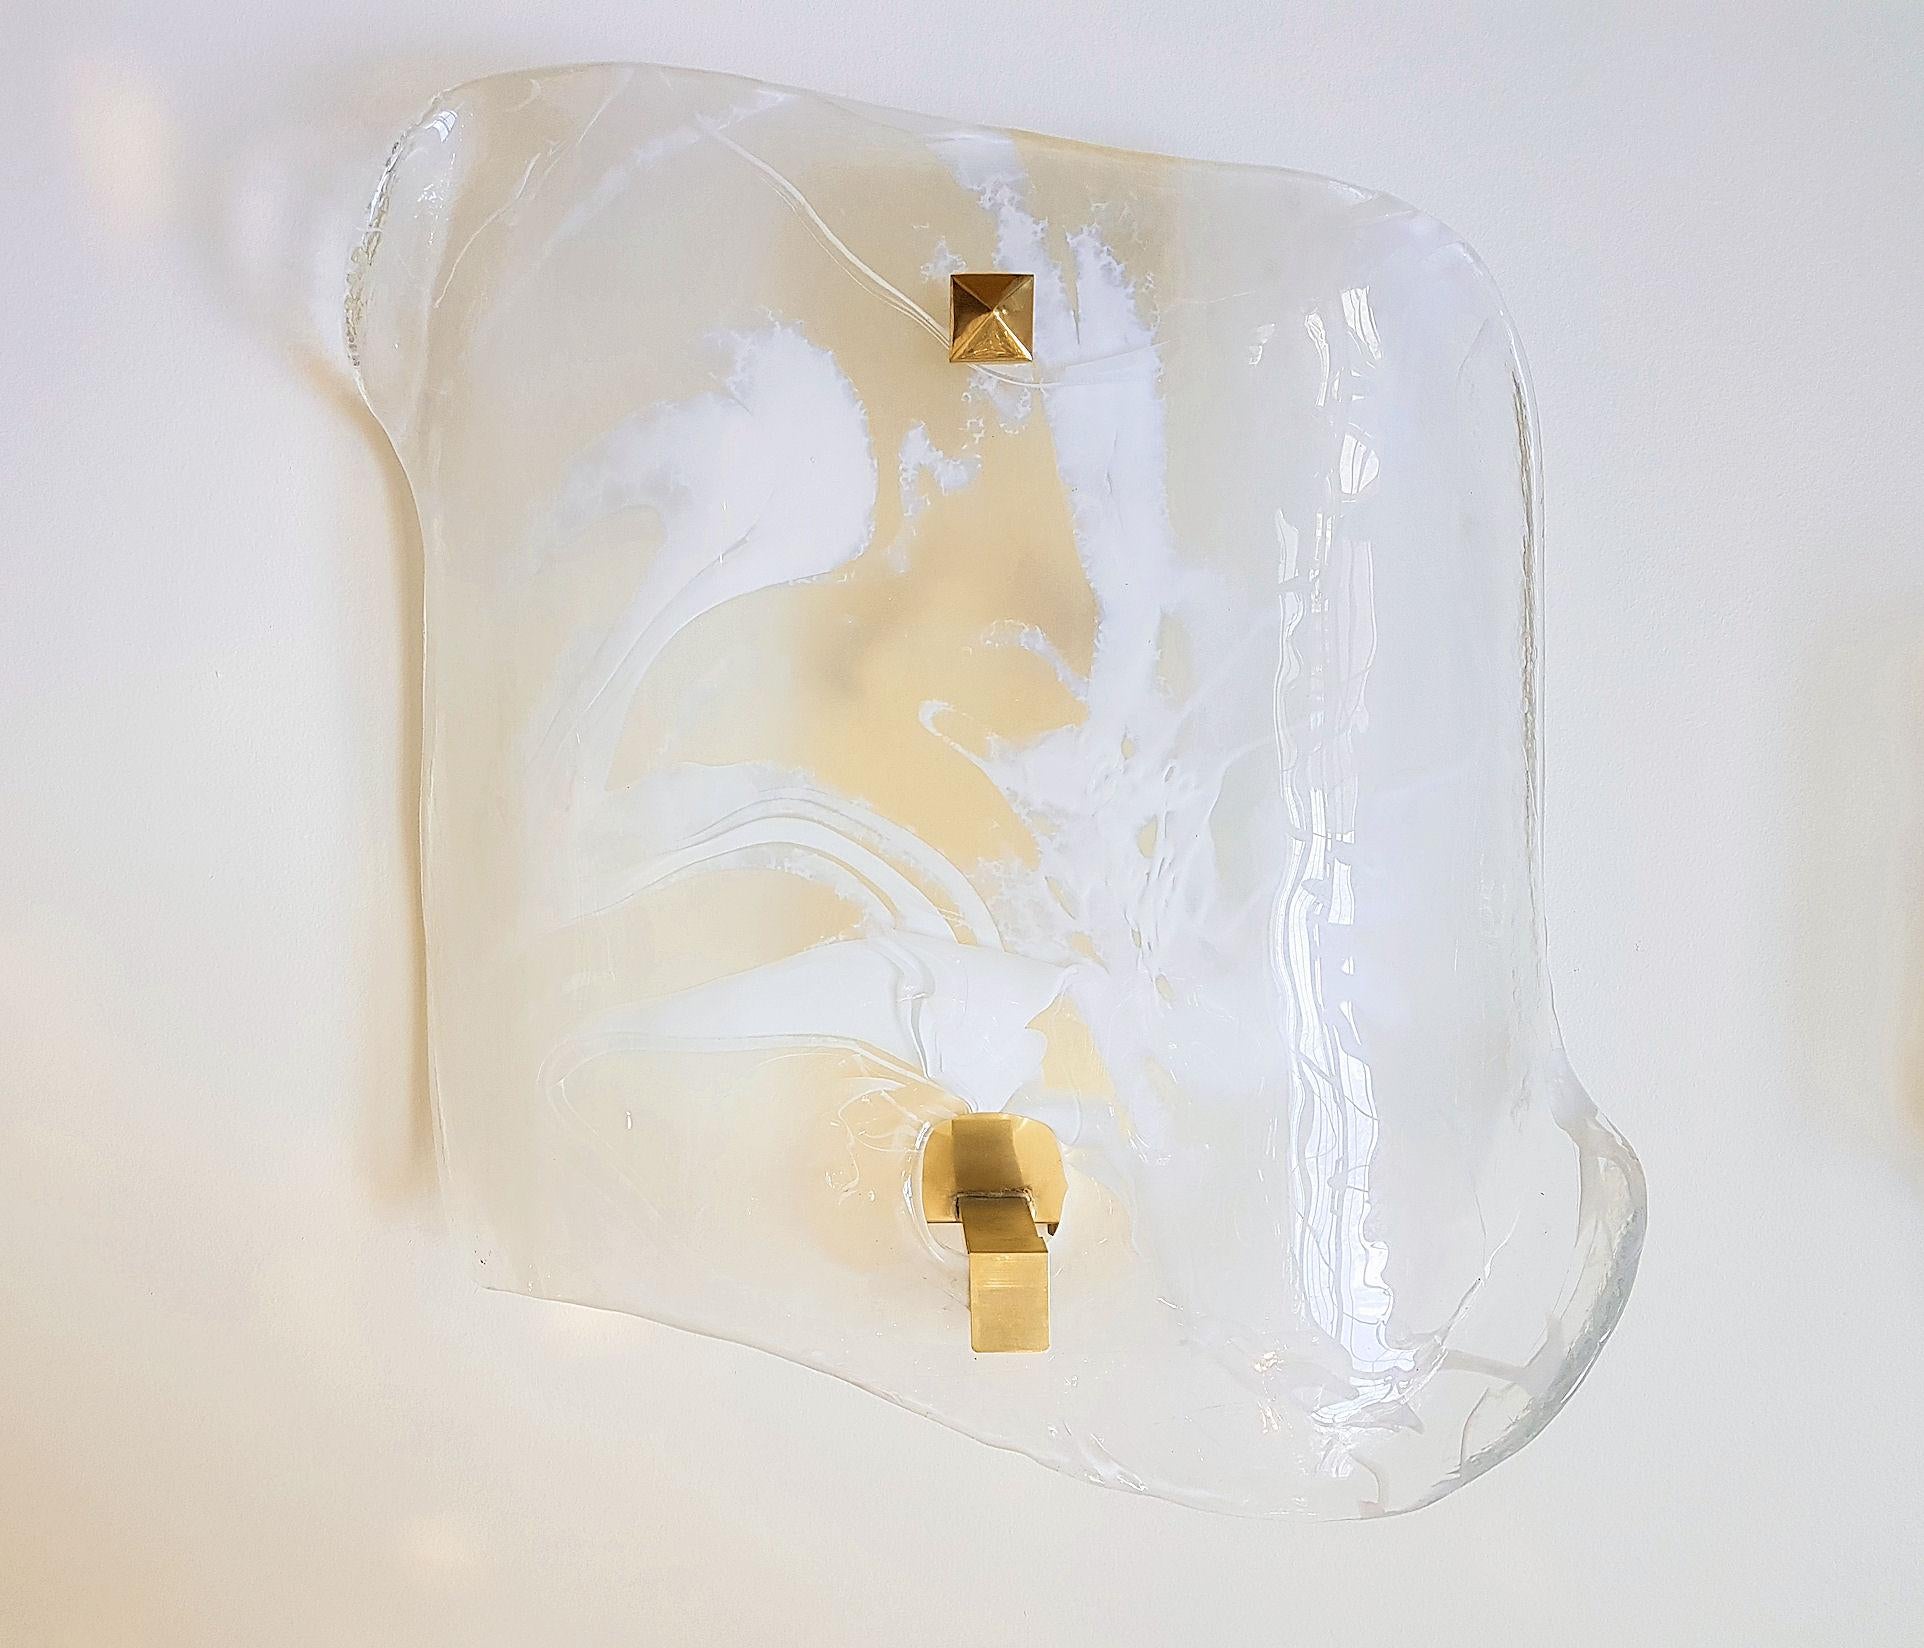 Pair of large asymmetrical square shape Murano glass wall sconces, with brass mounts.
Made of thick Murano glass, with a unique abstract handmade white veined color.
The Murano glass sconces are attributed to AV Mazzega, Italy, 1960s
2-light